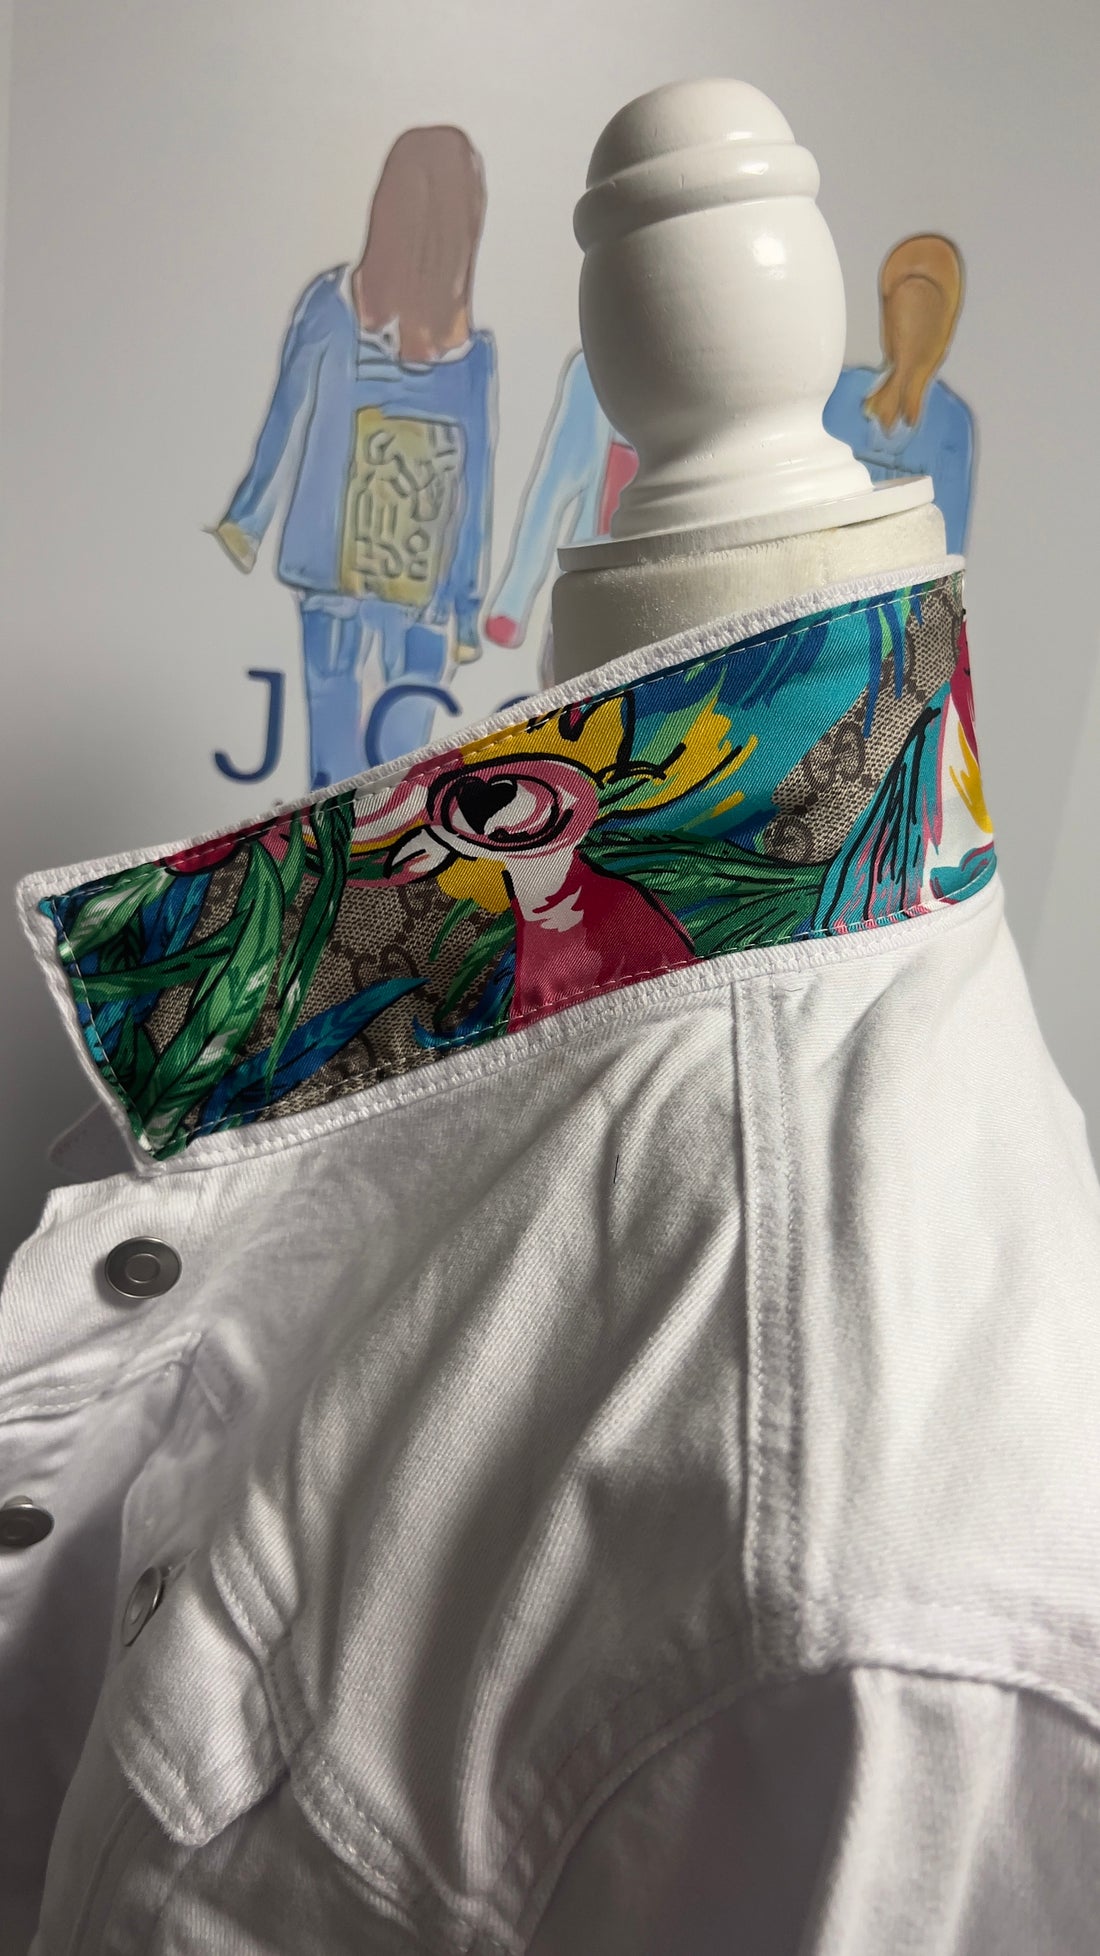 Gucci Pink and Tan Monogram Scarf on Denim Jacket S / White